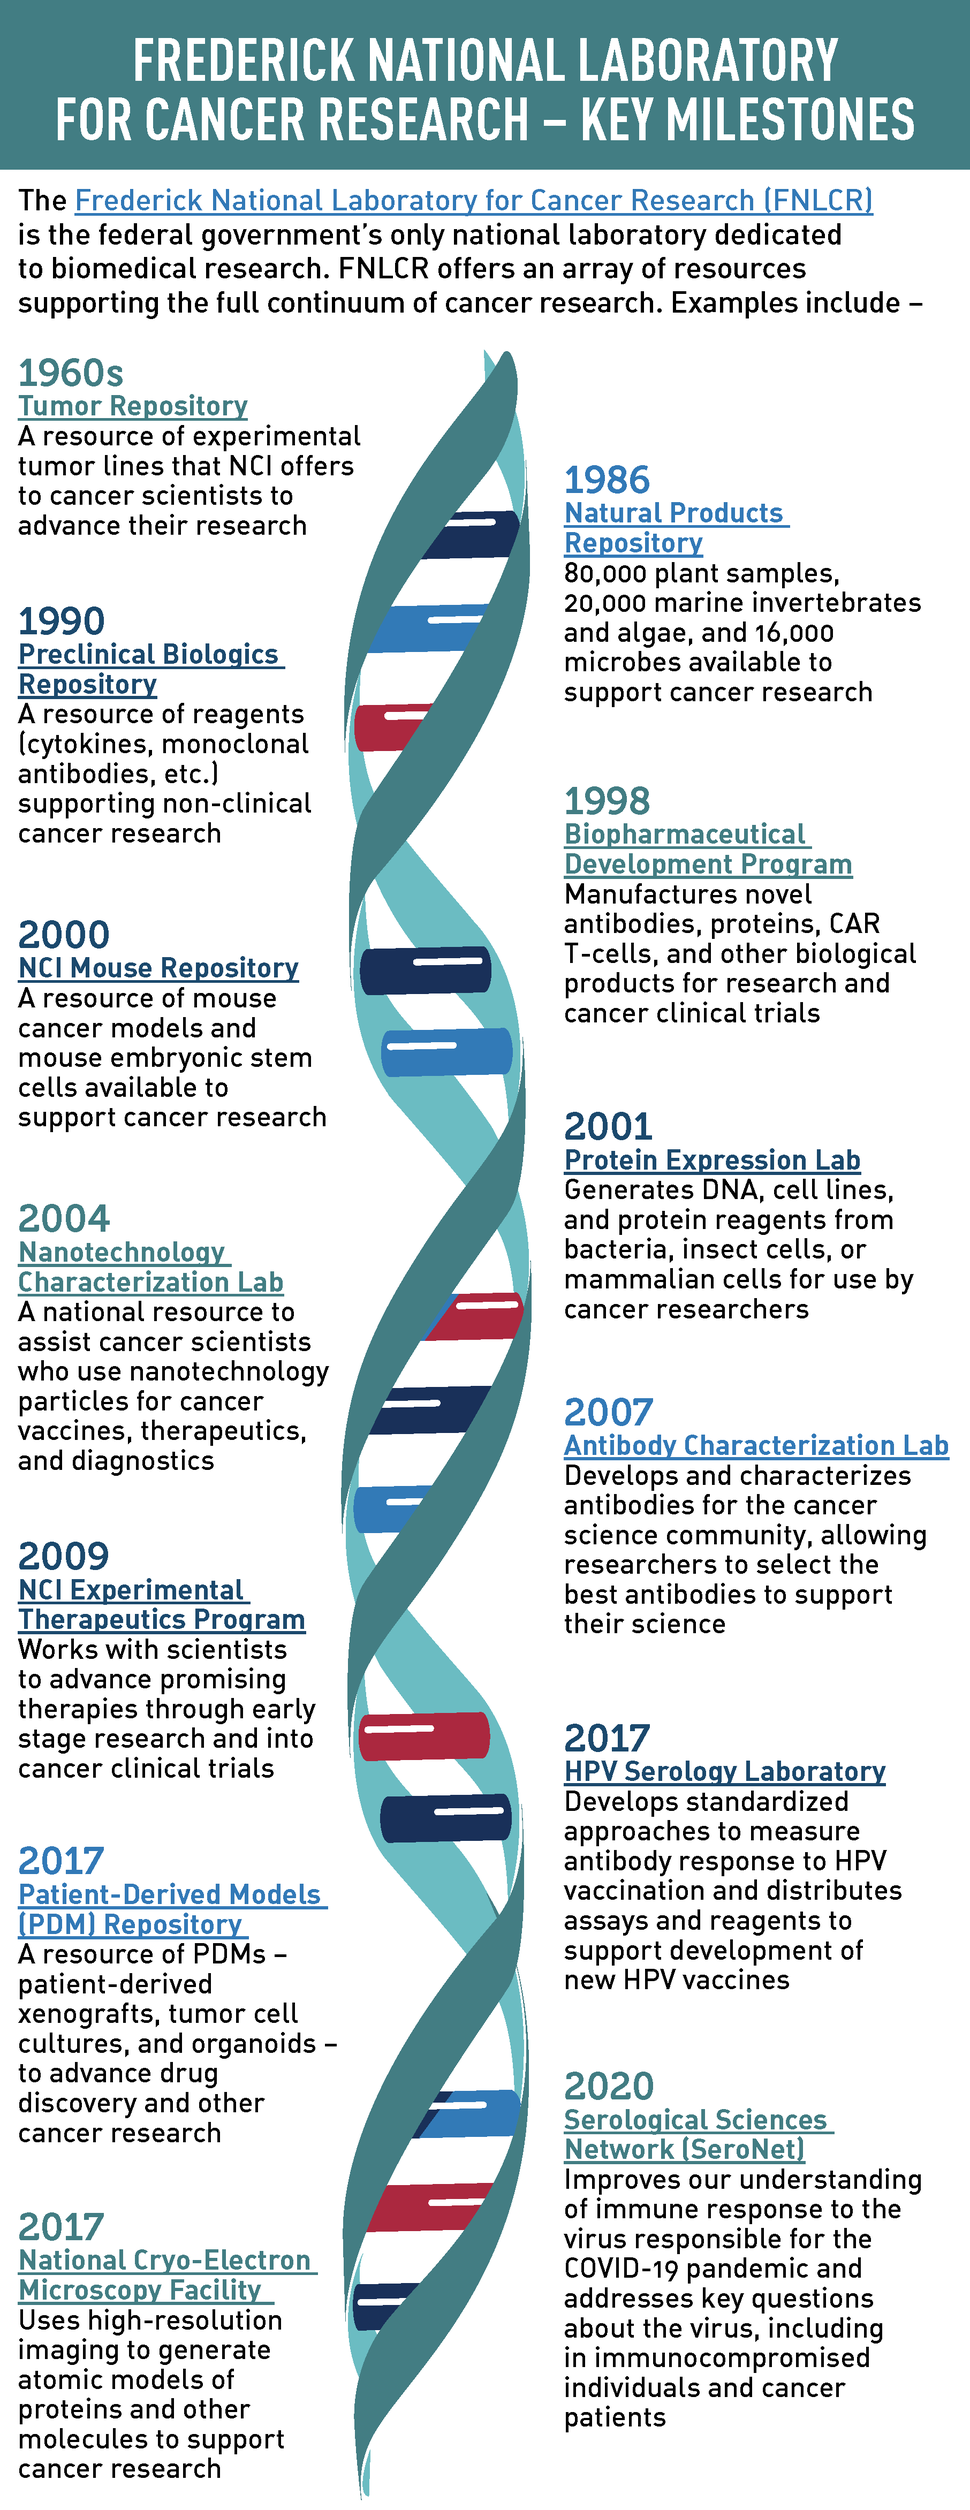 Timeline infographic of key dates when the Frederick National Laboratory for Cancer Research released new research resources. Starting in the 1960s – Tumor Repository; 1986 – Natural Products Repository; 1990 – Preclinical Biologics Repository; 1998 – Biopharmaceutical Development Program; 2000 – NCI Mouse Repository; 2001 – Protein Expression Lab; 2004 – Nanotechnology Characterization Lab; 2007 Antibody Characterization Lab; 2009 – NCI Experimental Therapeutics Program; 2017 – HPV Serology Laboratory; 201